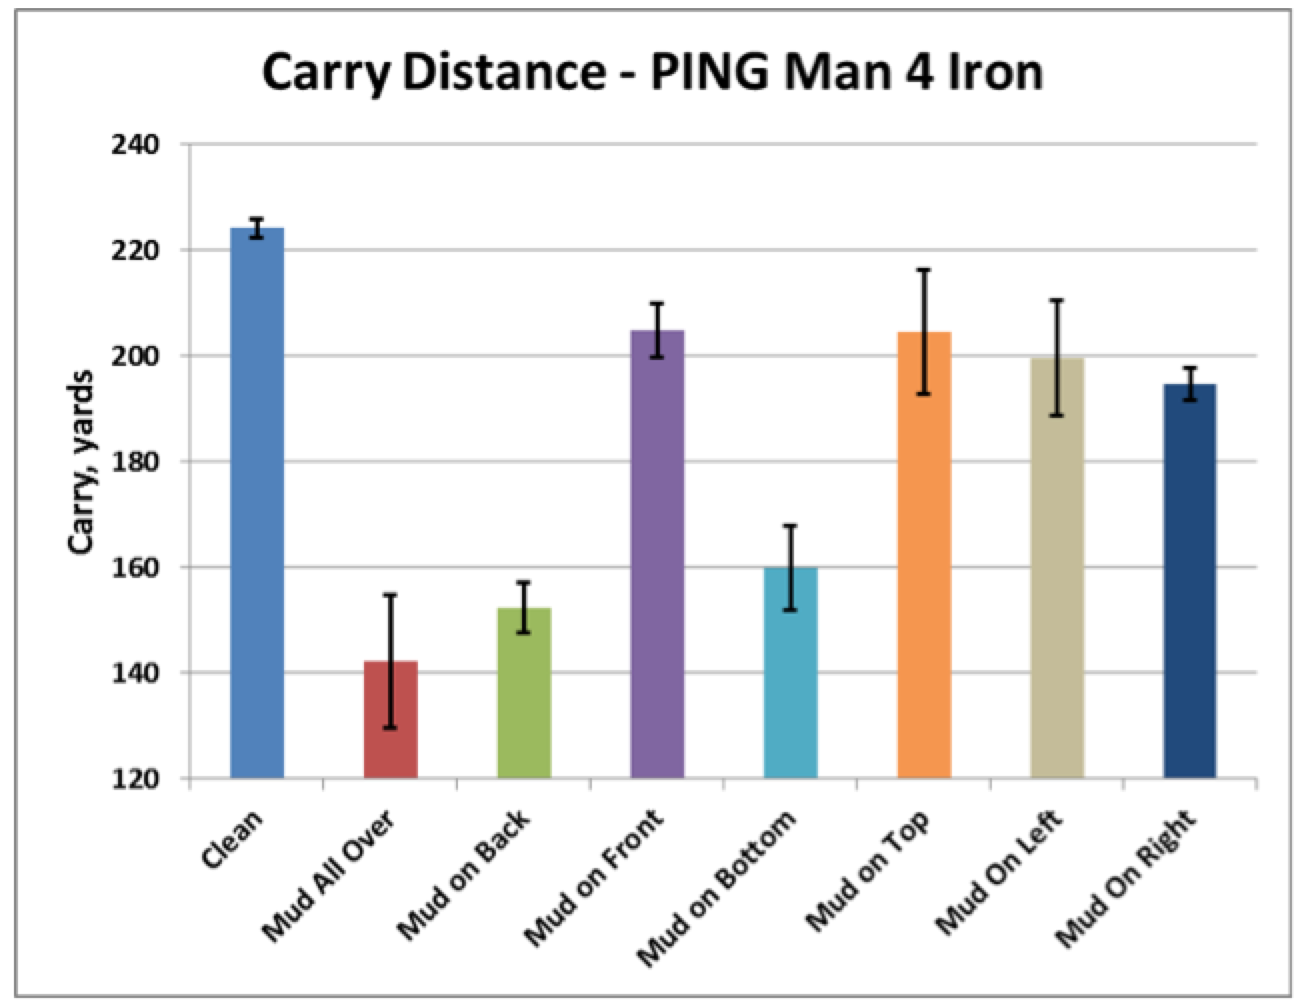 Carry_distance_Ping_Man_4_iron